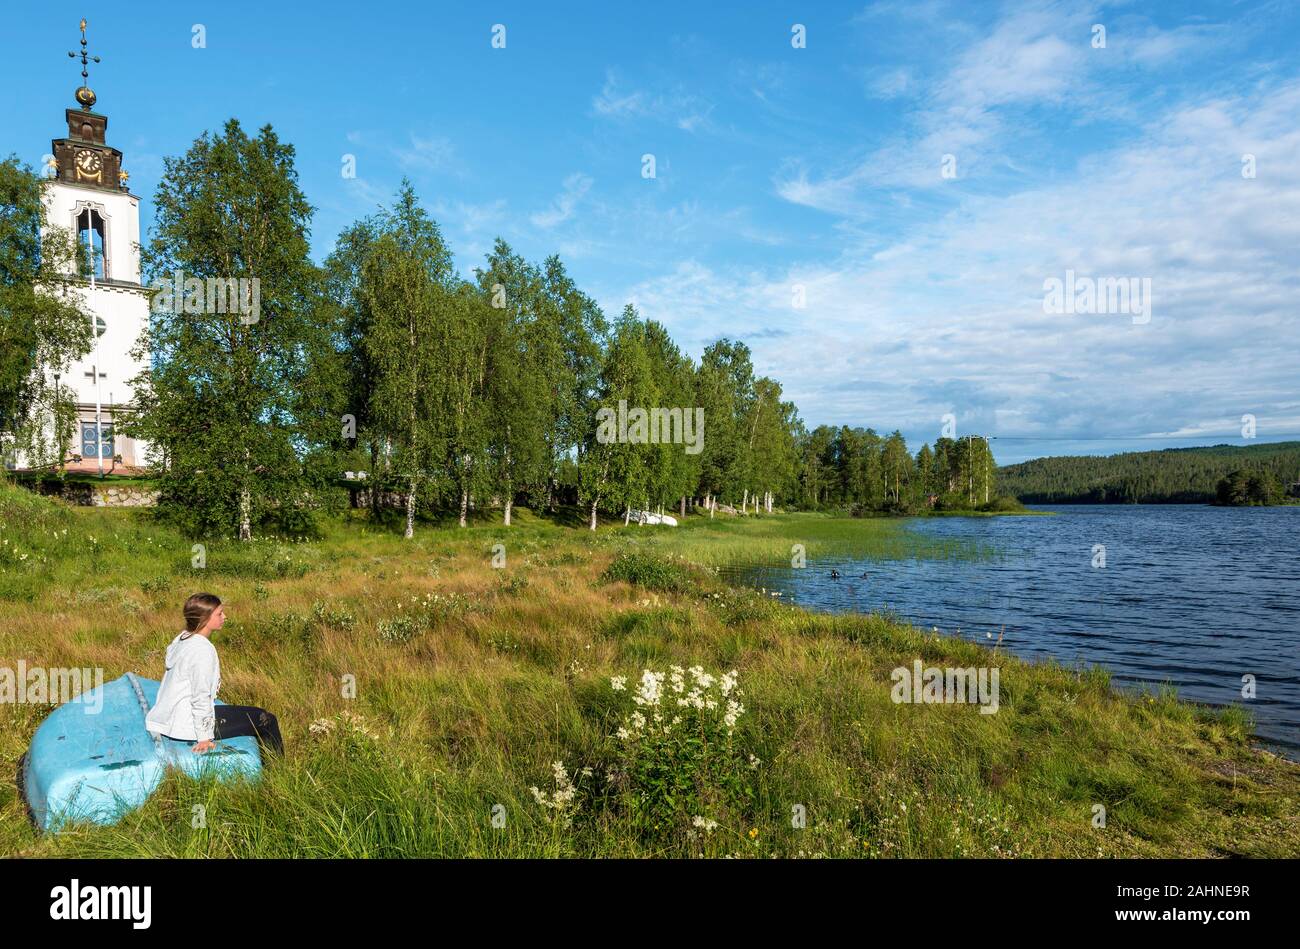 Girl is sitting in on returned bark and looking at Storan-Osterdalalven lake, the Protestant church of Idre village is at right background. Dalarna co Stock Photo